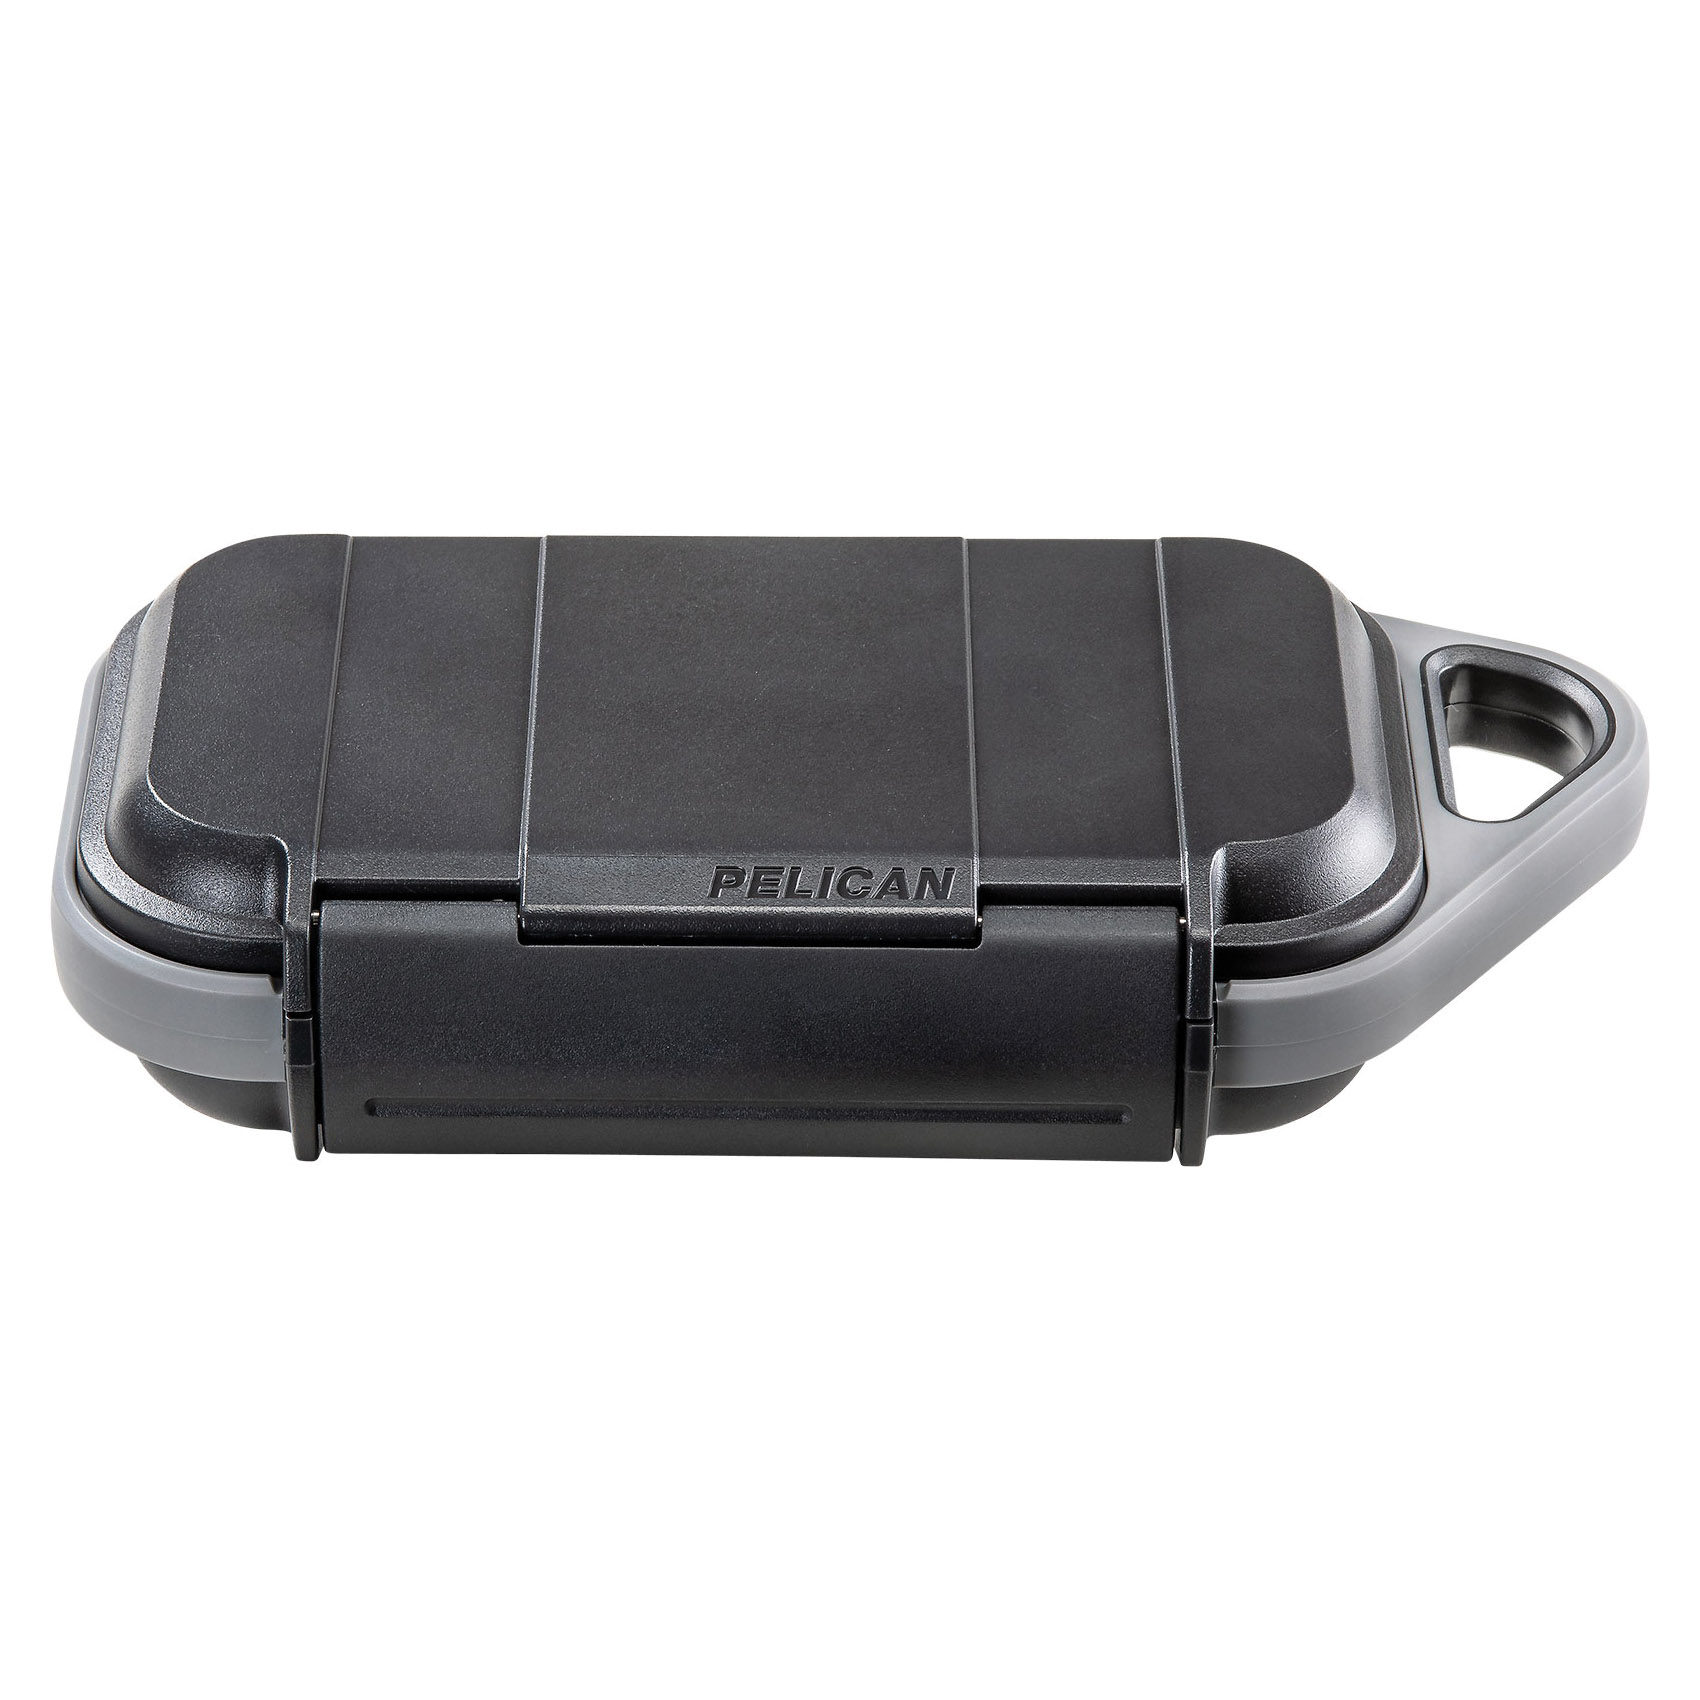 Pelican G40 Series GOG400-DGRY Personal Utility Case, ABS, Anthracite/Gray, For: iPhone Xs Max, Samsung Note 9 - 1